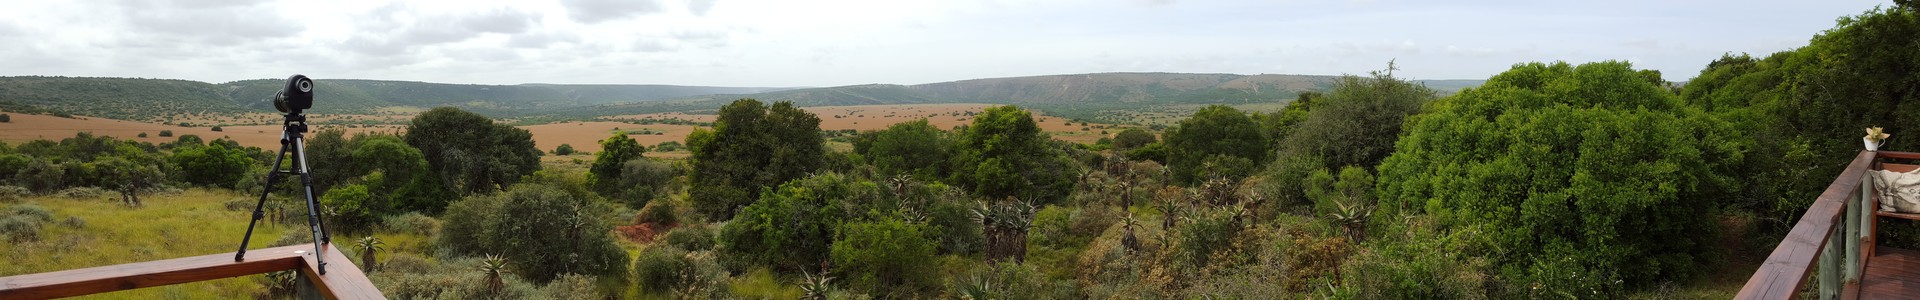 Woodbury Tented Camp View